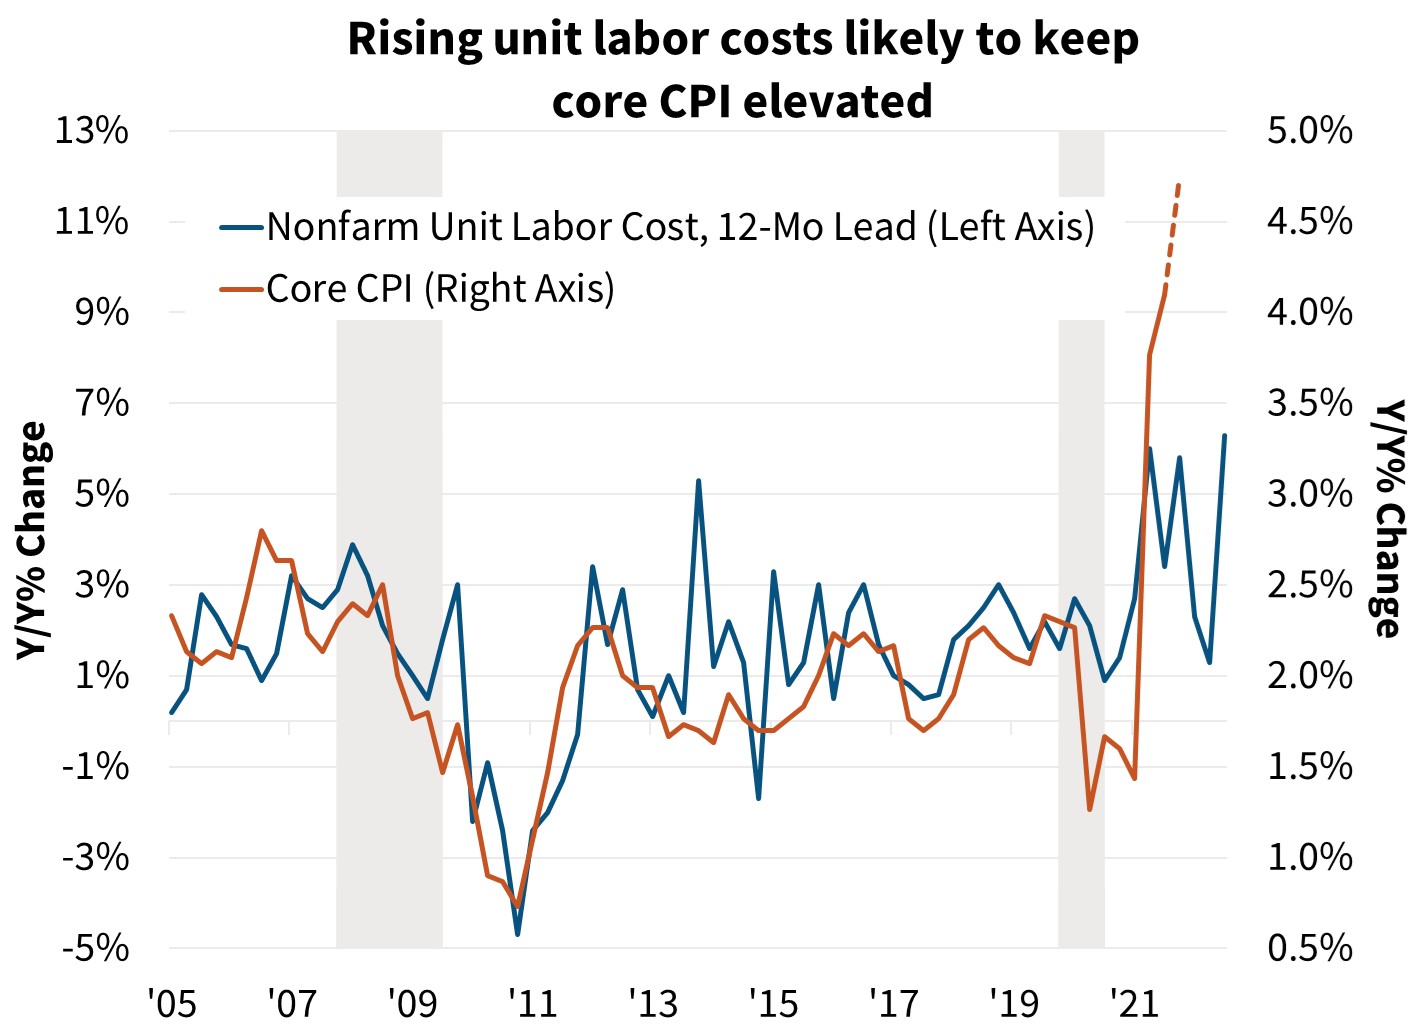  Rising unit labor costs likely to keep core CPI elevation